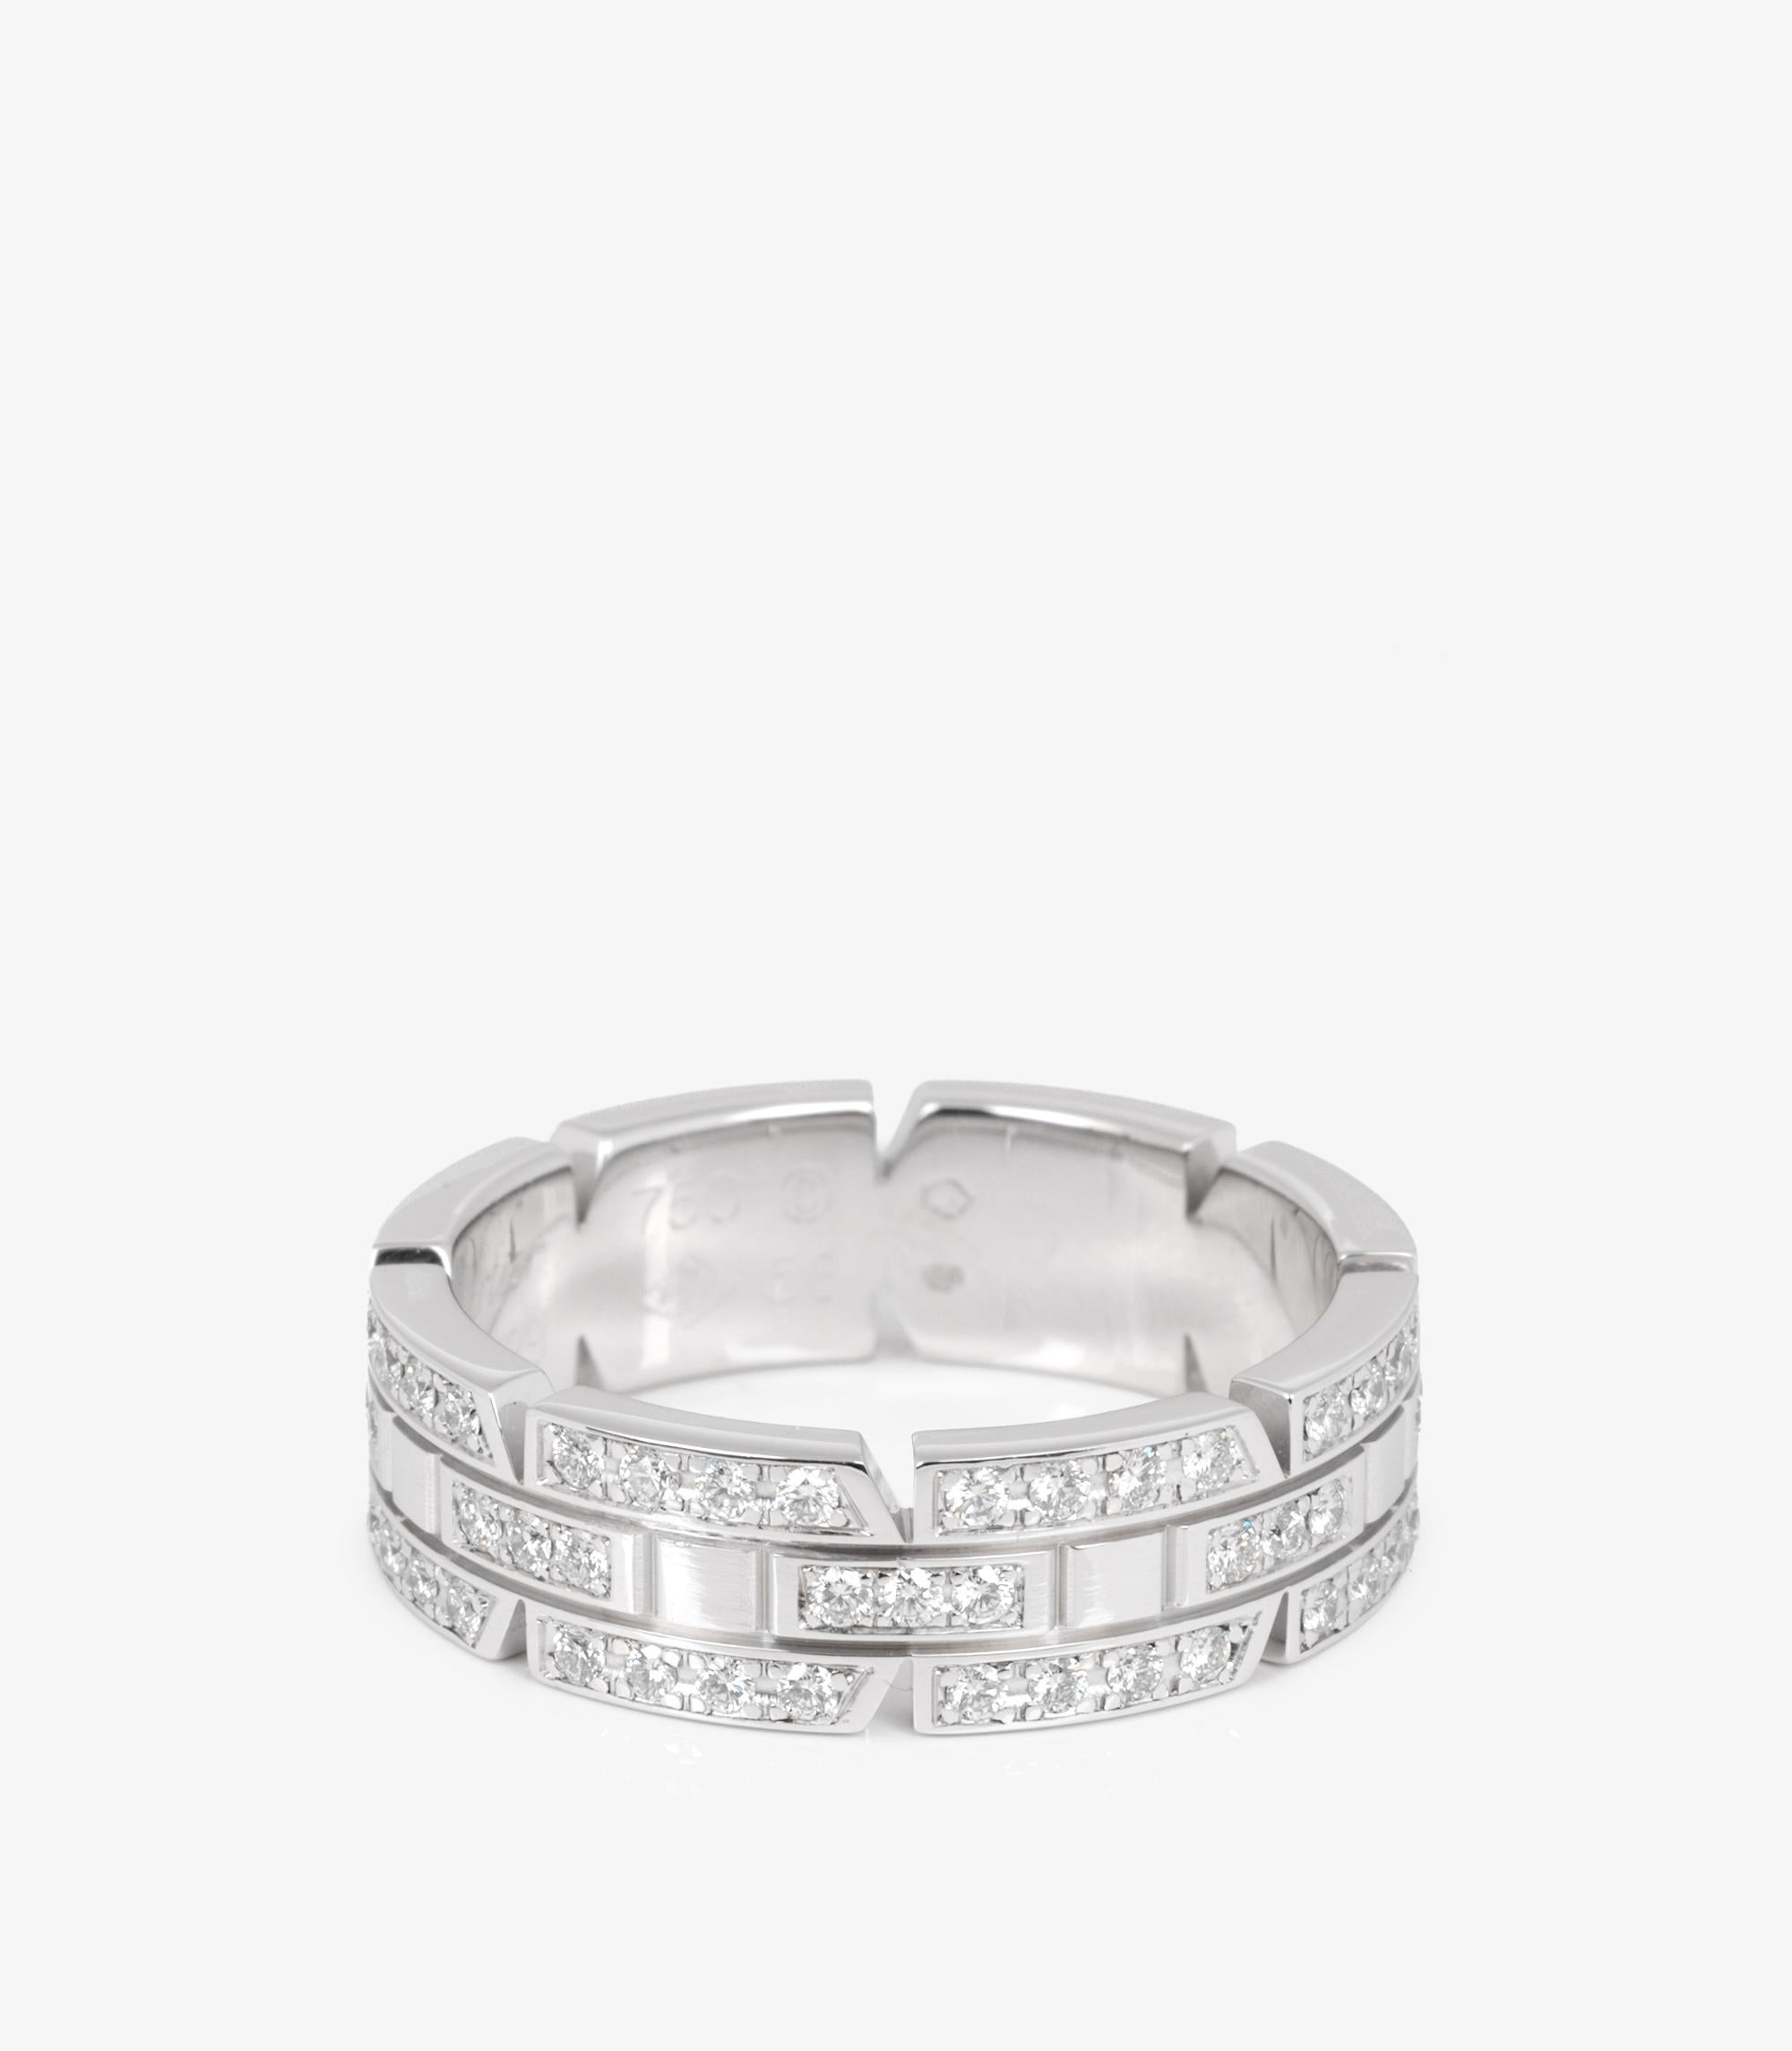 Cartier Diamond Accent 18ct White Gold Tank Française Ring

Brand- Cartier
Model- Tank Française Ring
Product Type- Ring
Serial Number- NH****
Age- Circa 2005
Accompanied By- Cartier Box, Certificate, Service Papers
Material(s)- 18ct White